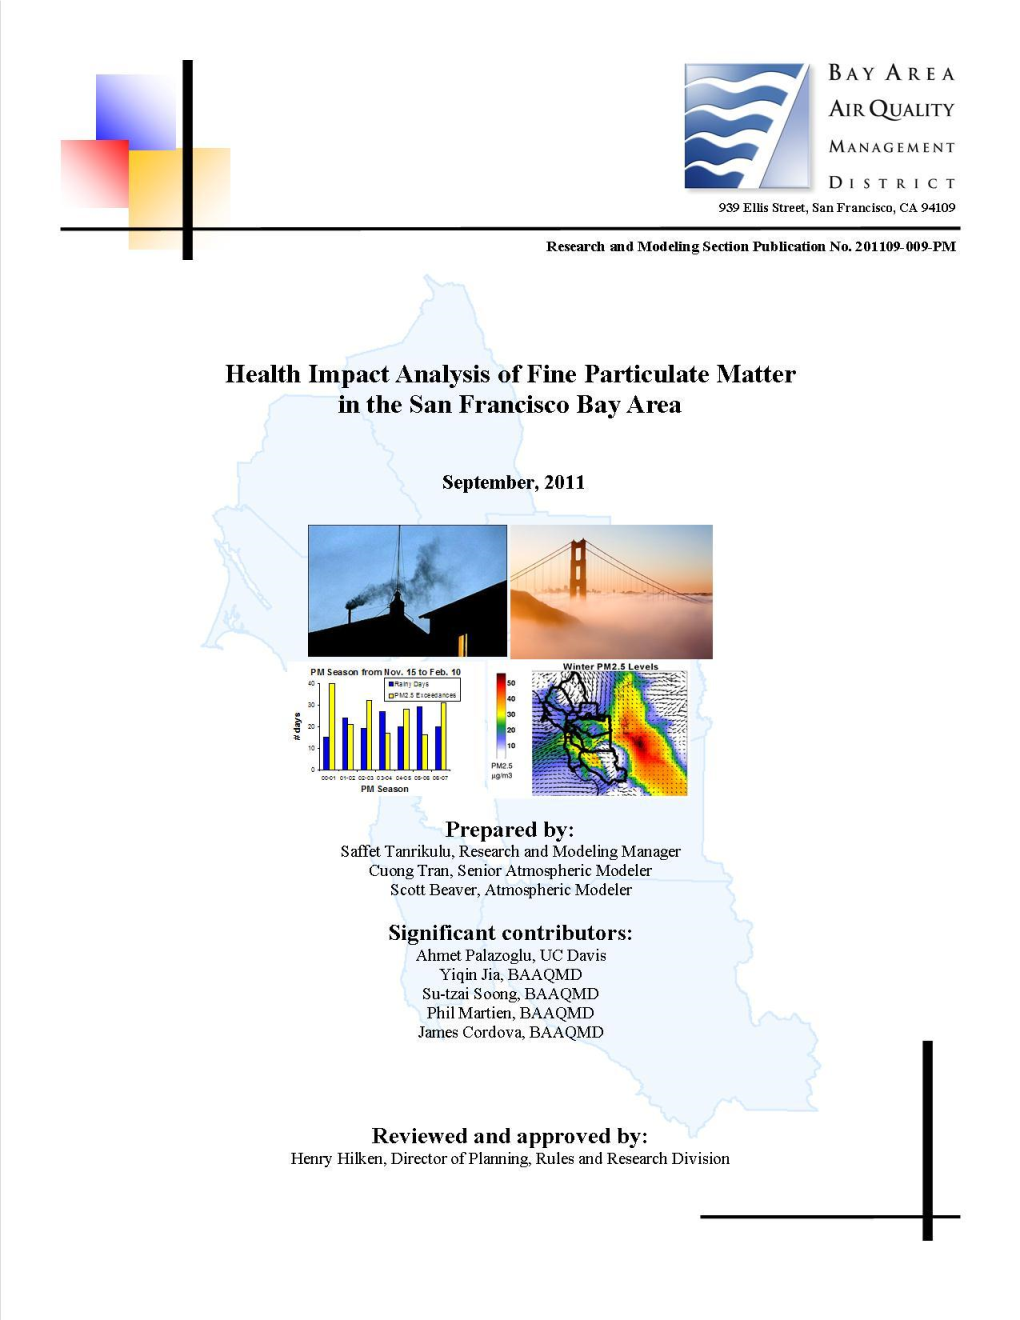 Health Impact Analysis of Fine Particulate Matter in the San Francisco Bay Area